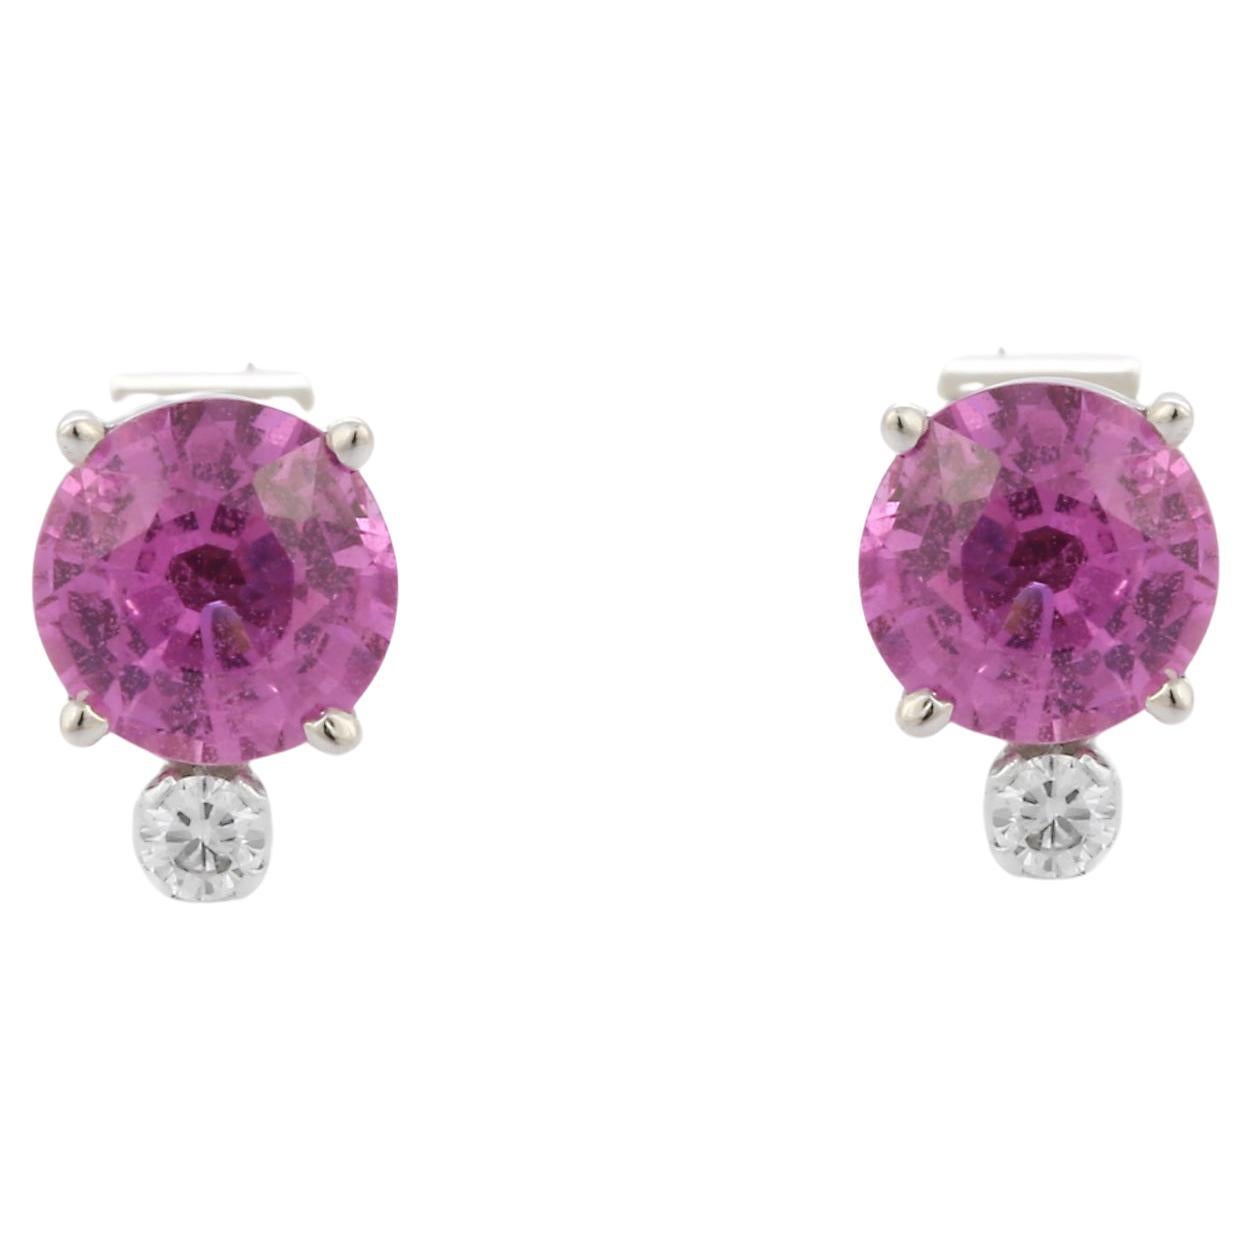 1.54 Carat Round Pink Sapphire Stud Earring in 18K Solid White Gold with Diamond